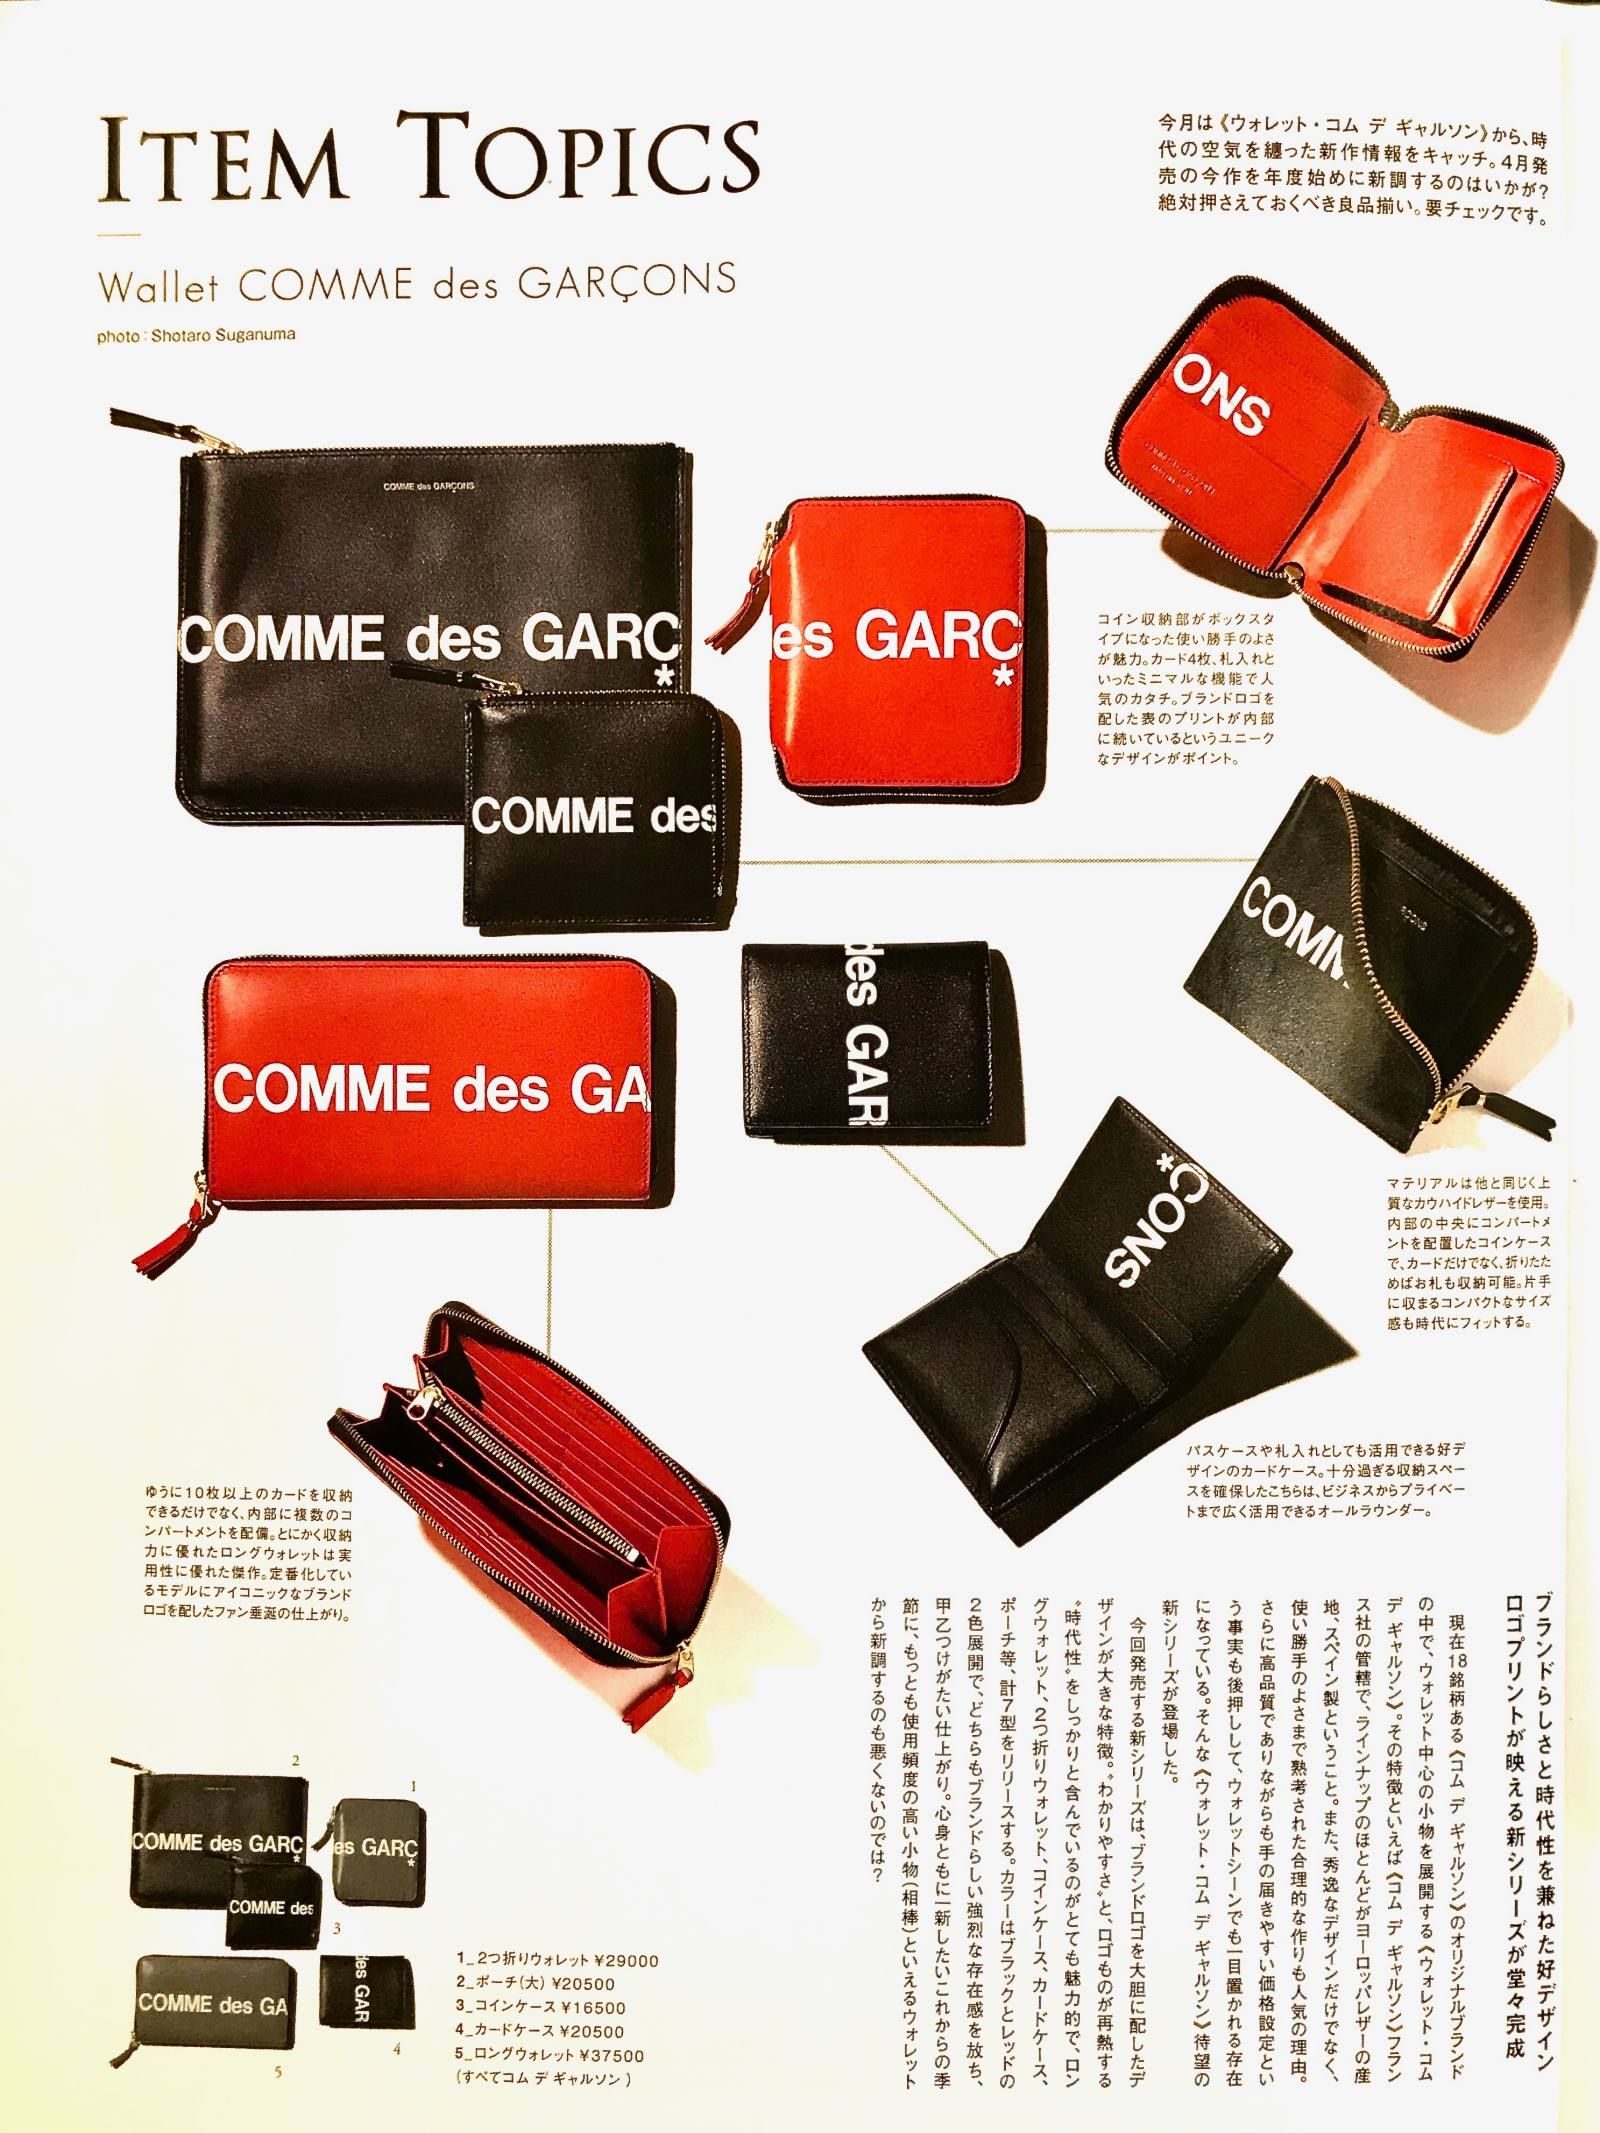 Wallet COMME des GARCONS「ロゴウォレット」 | mark